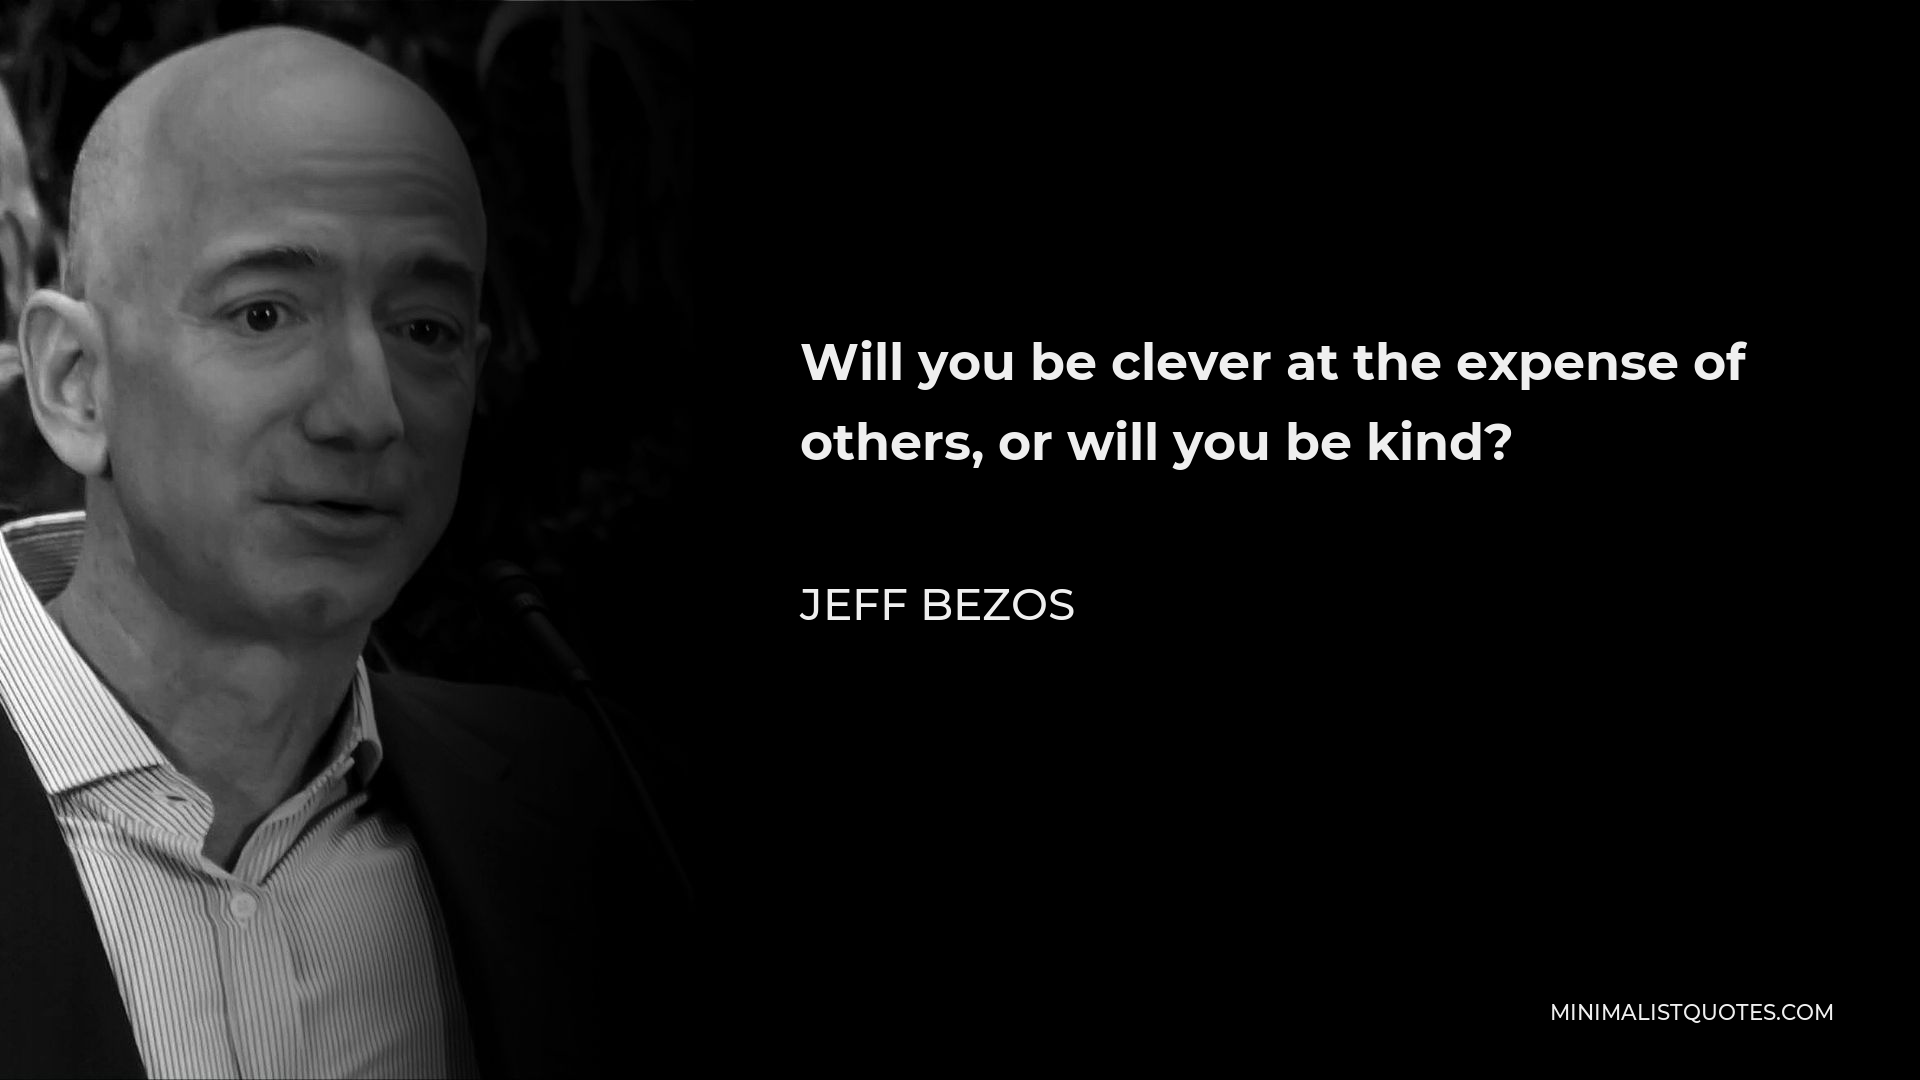 Jeff Bezos Quote - Will you be clever at the expense of others, or will you be kind?